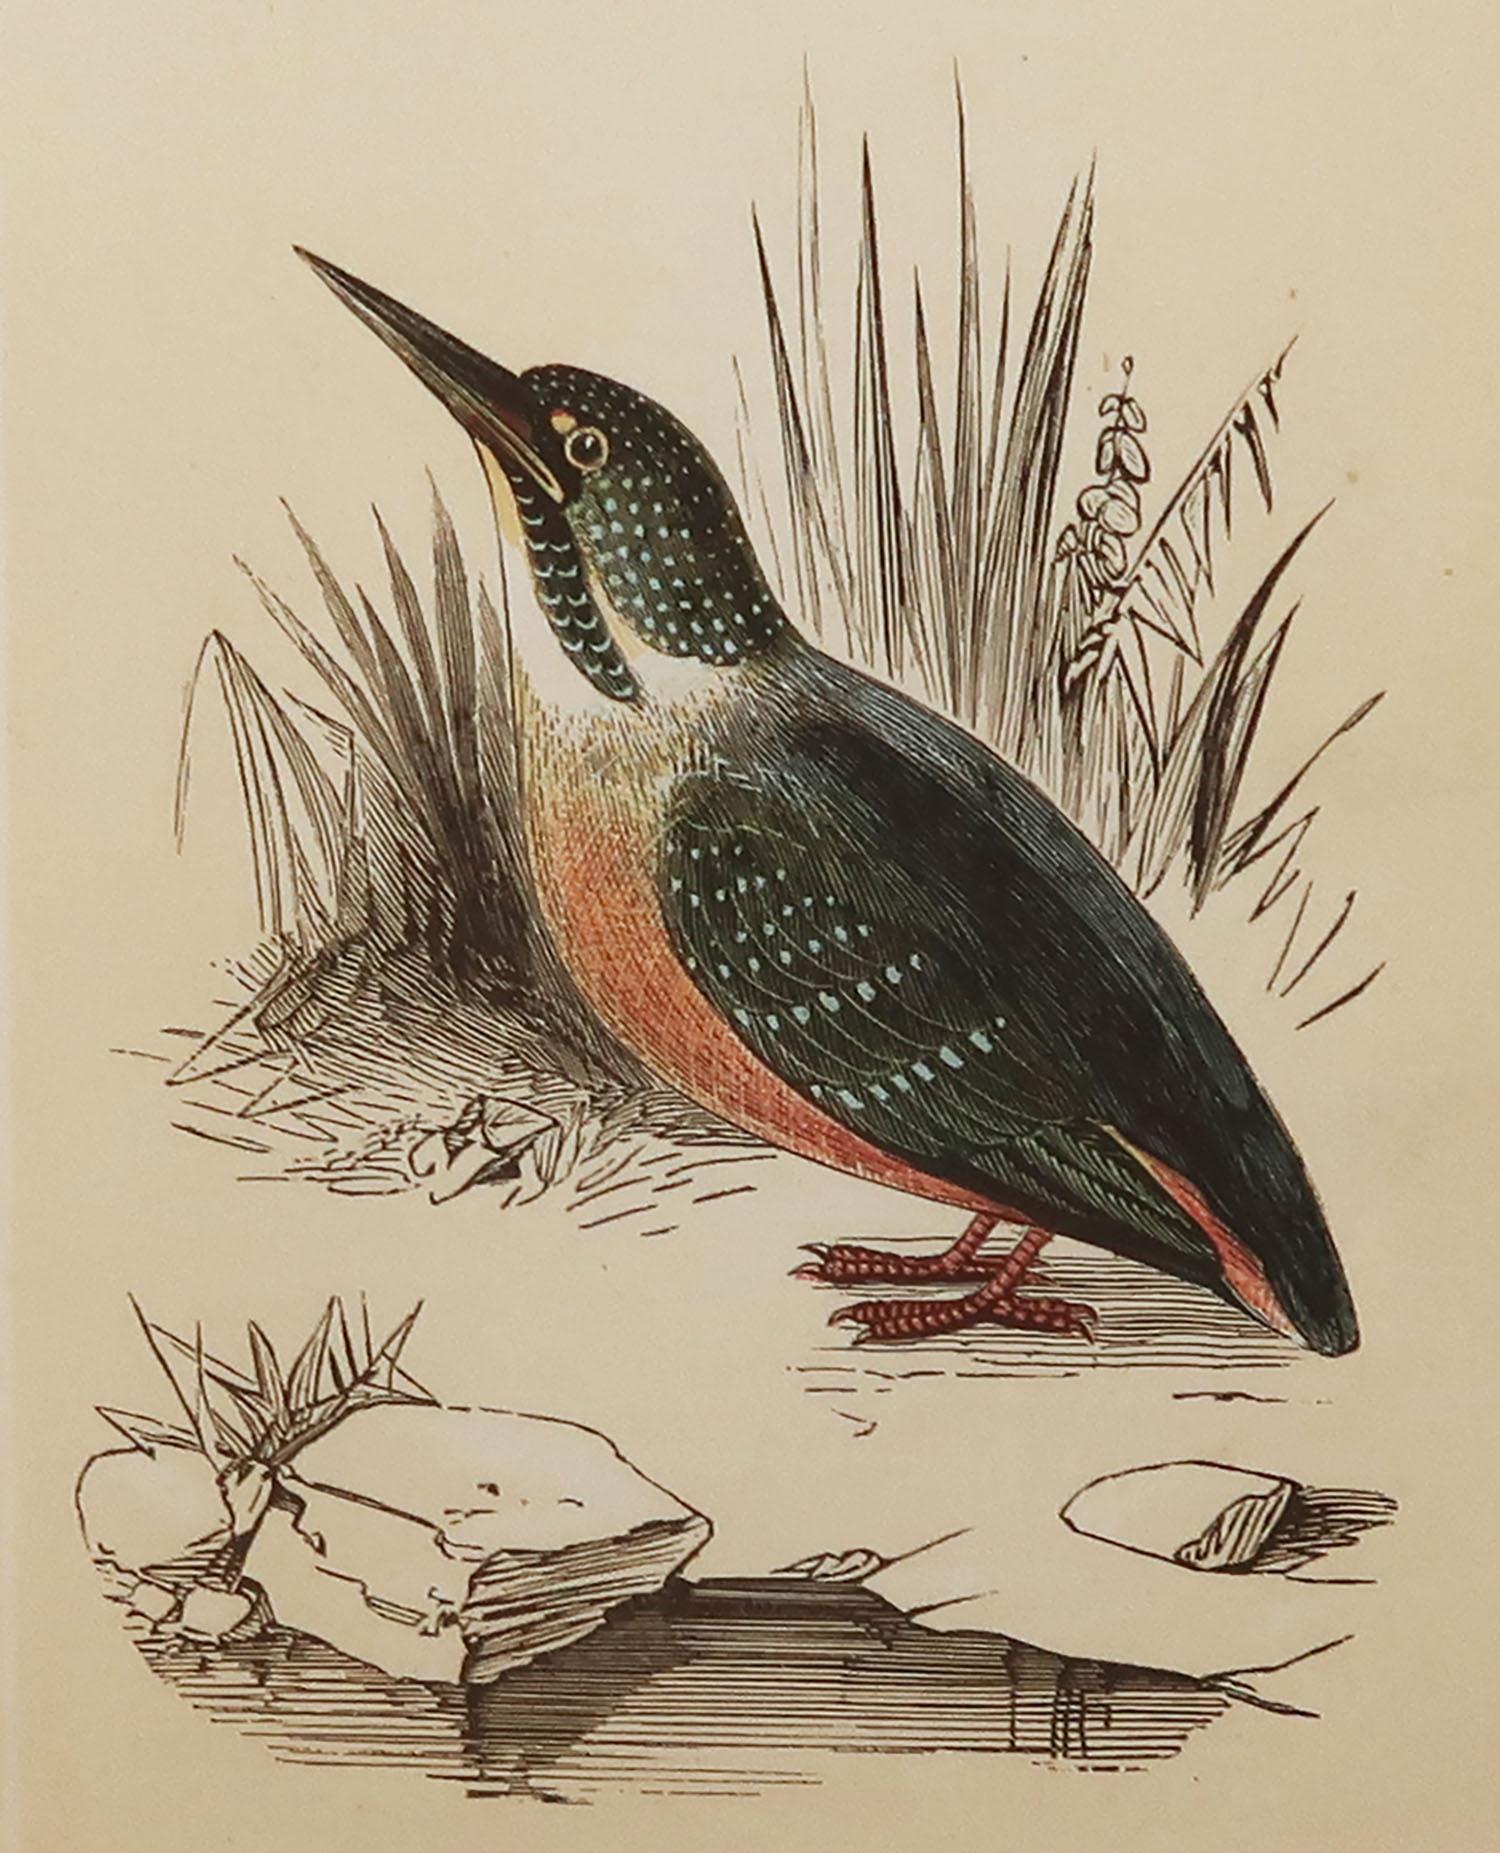 Great image of a Kingfisher

Unframed. It gives you the option of perhaps making a set up using your own choice of frames.

Lithograph with original color.

Published by Tallis circa 1850

Crudely inscribed title has been erased at the